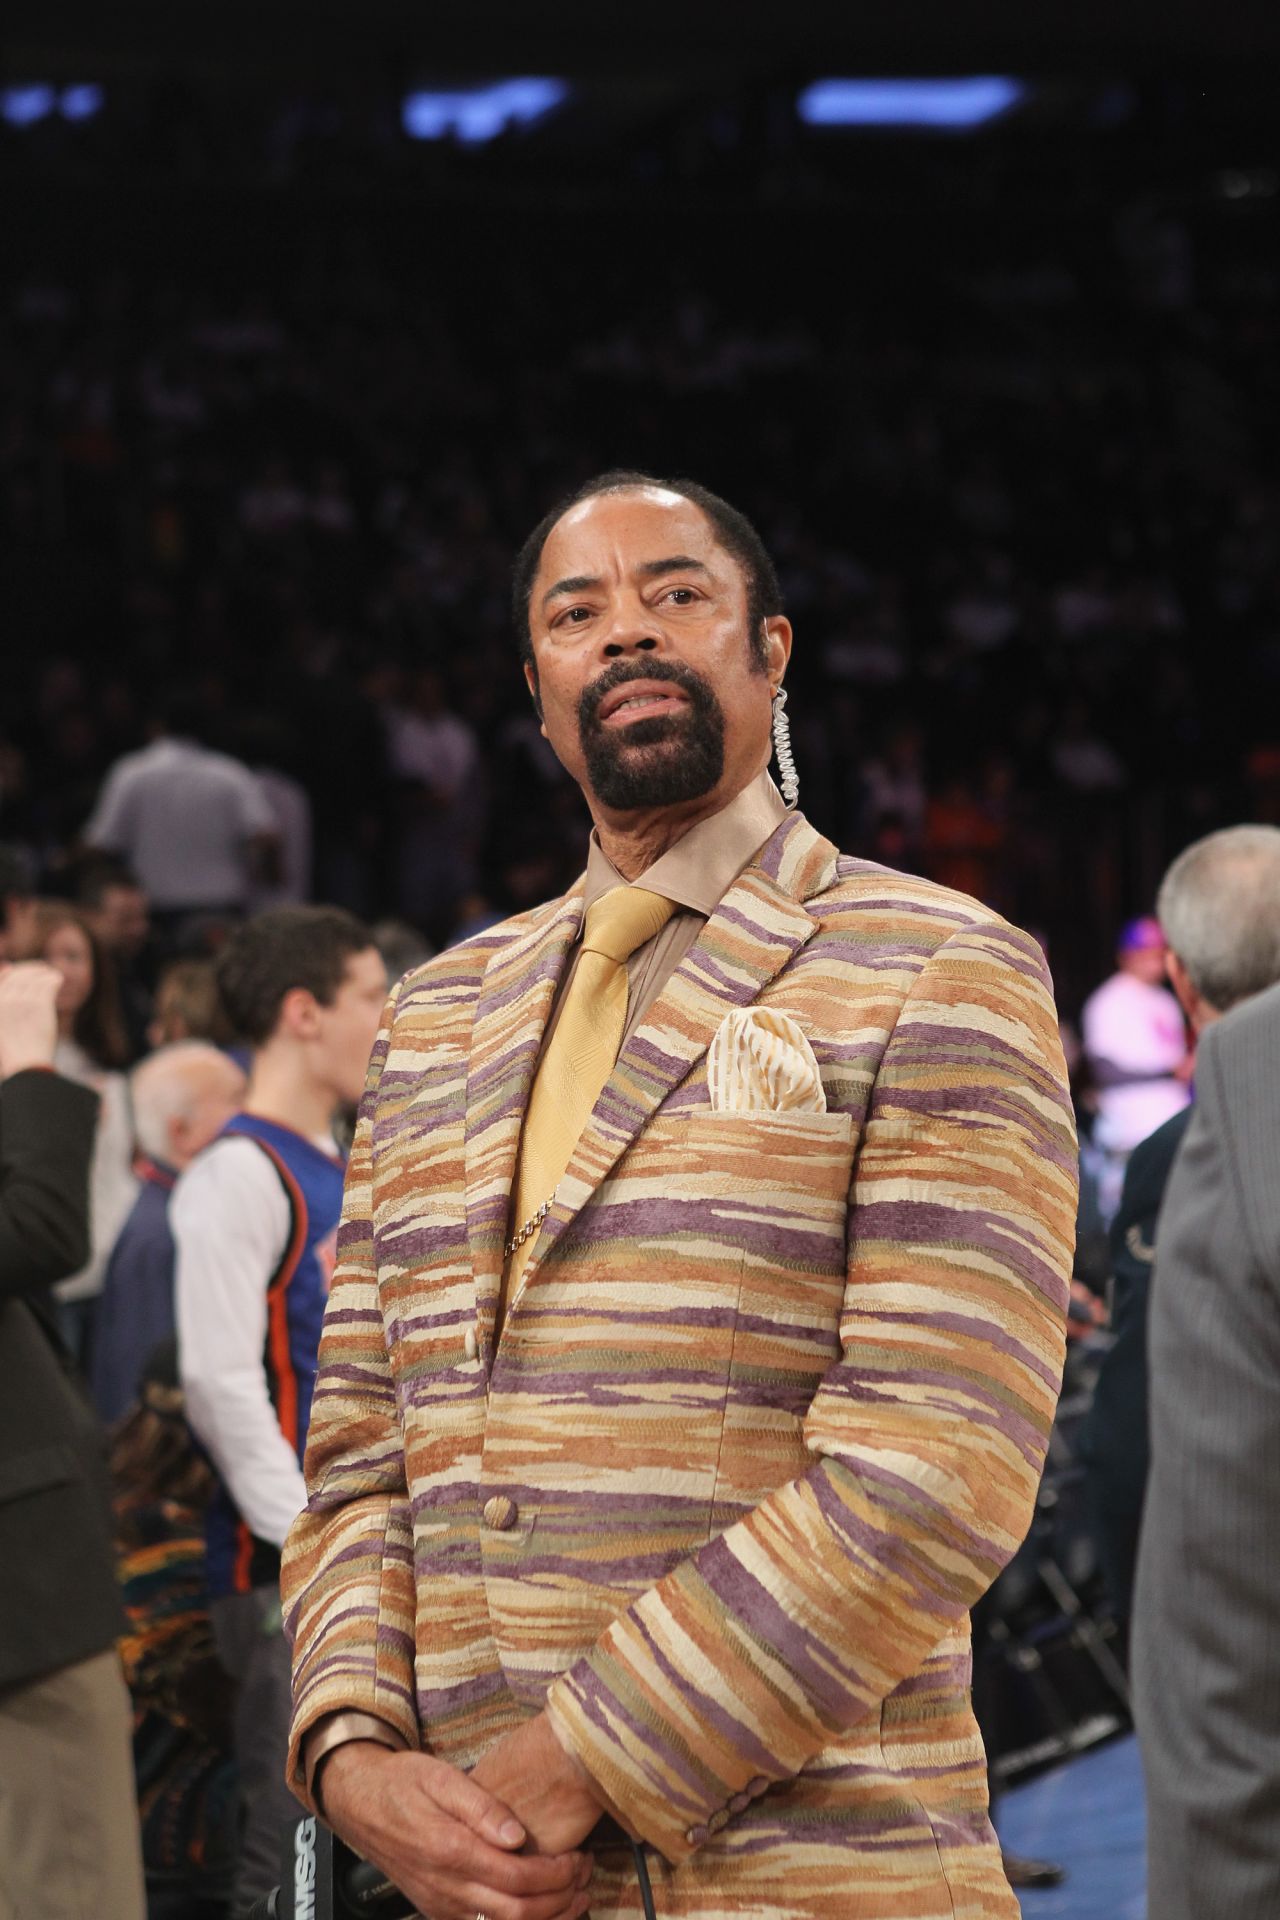 Former New York Knicks legend Walt Frazier sported fur coats and fedora hats as a player, and has kept his sartorial standards high as a sideline announcer.  